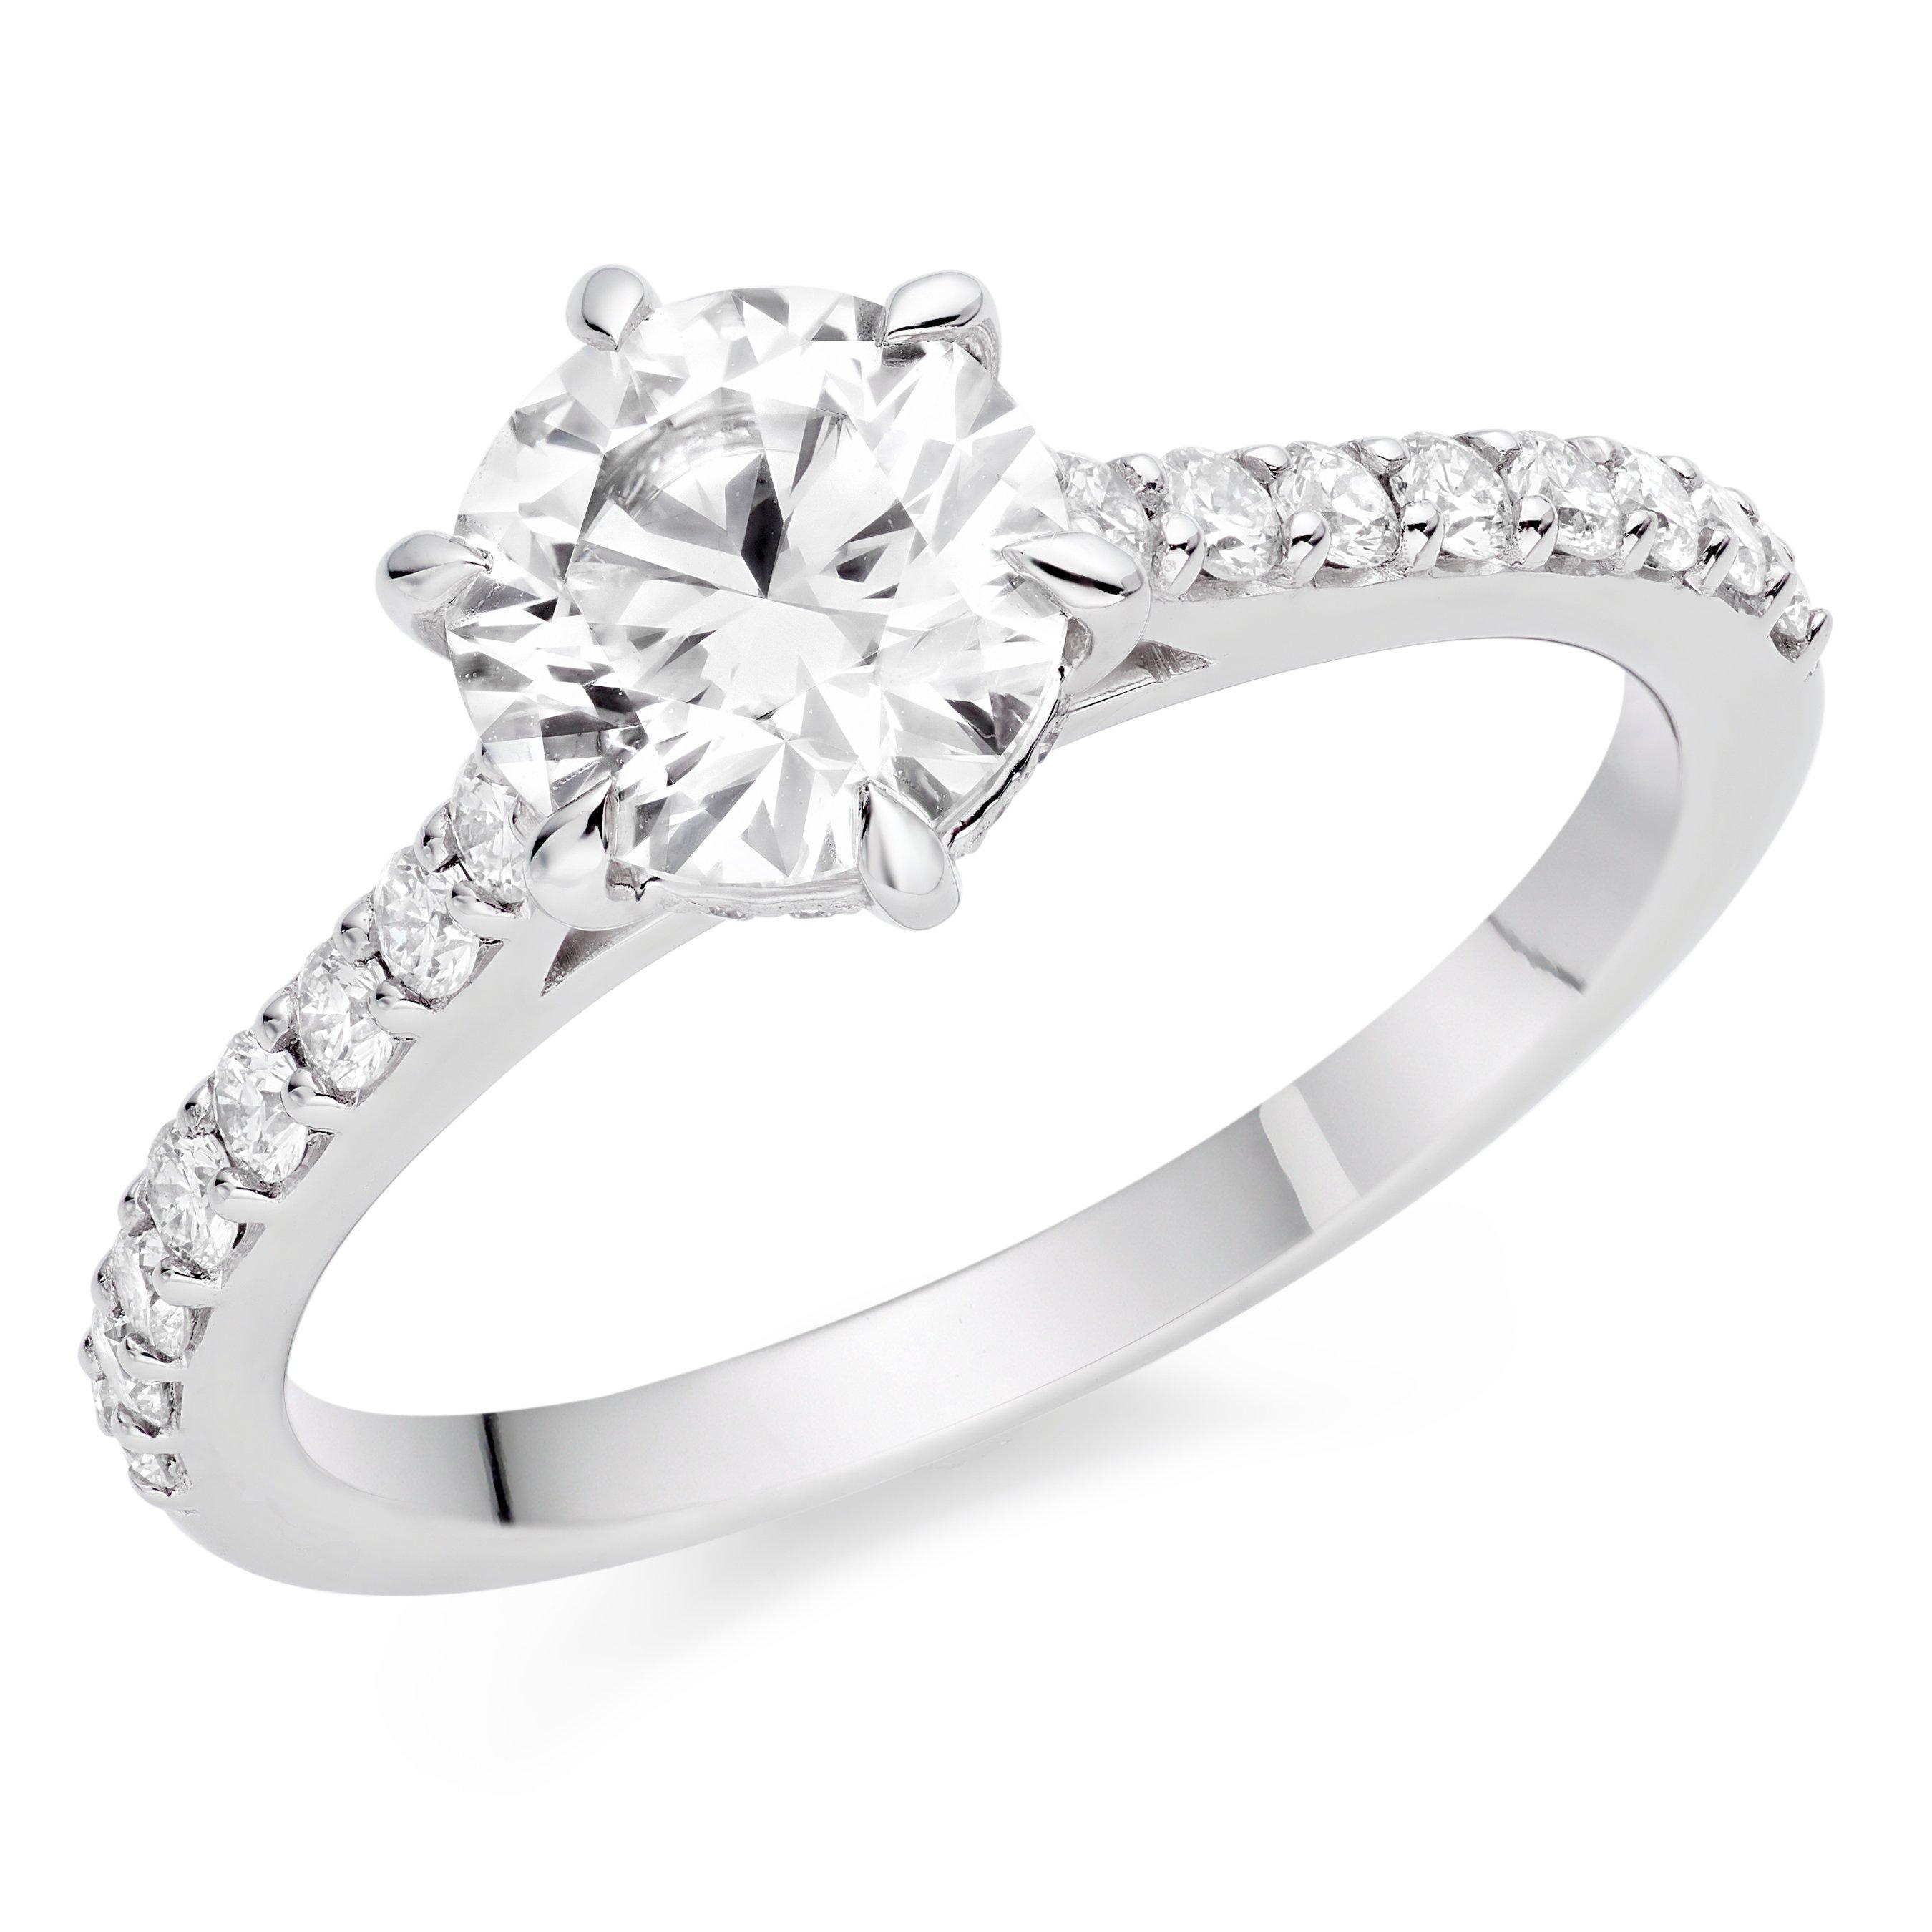 Once Platinum Diamond Solitaire Ring | 0139590 | Beaverbrooks the Jewellers